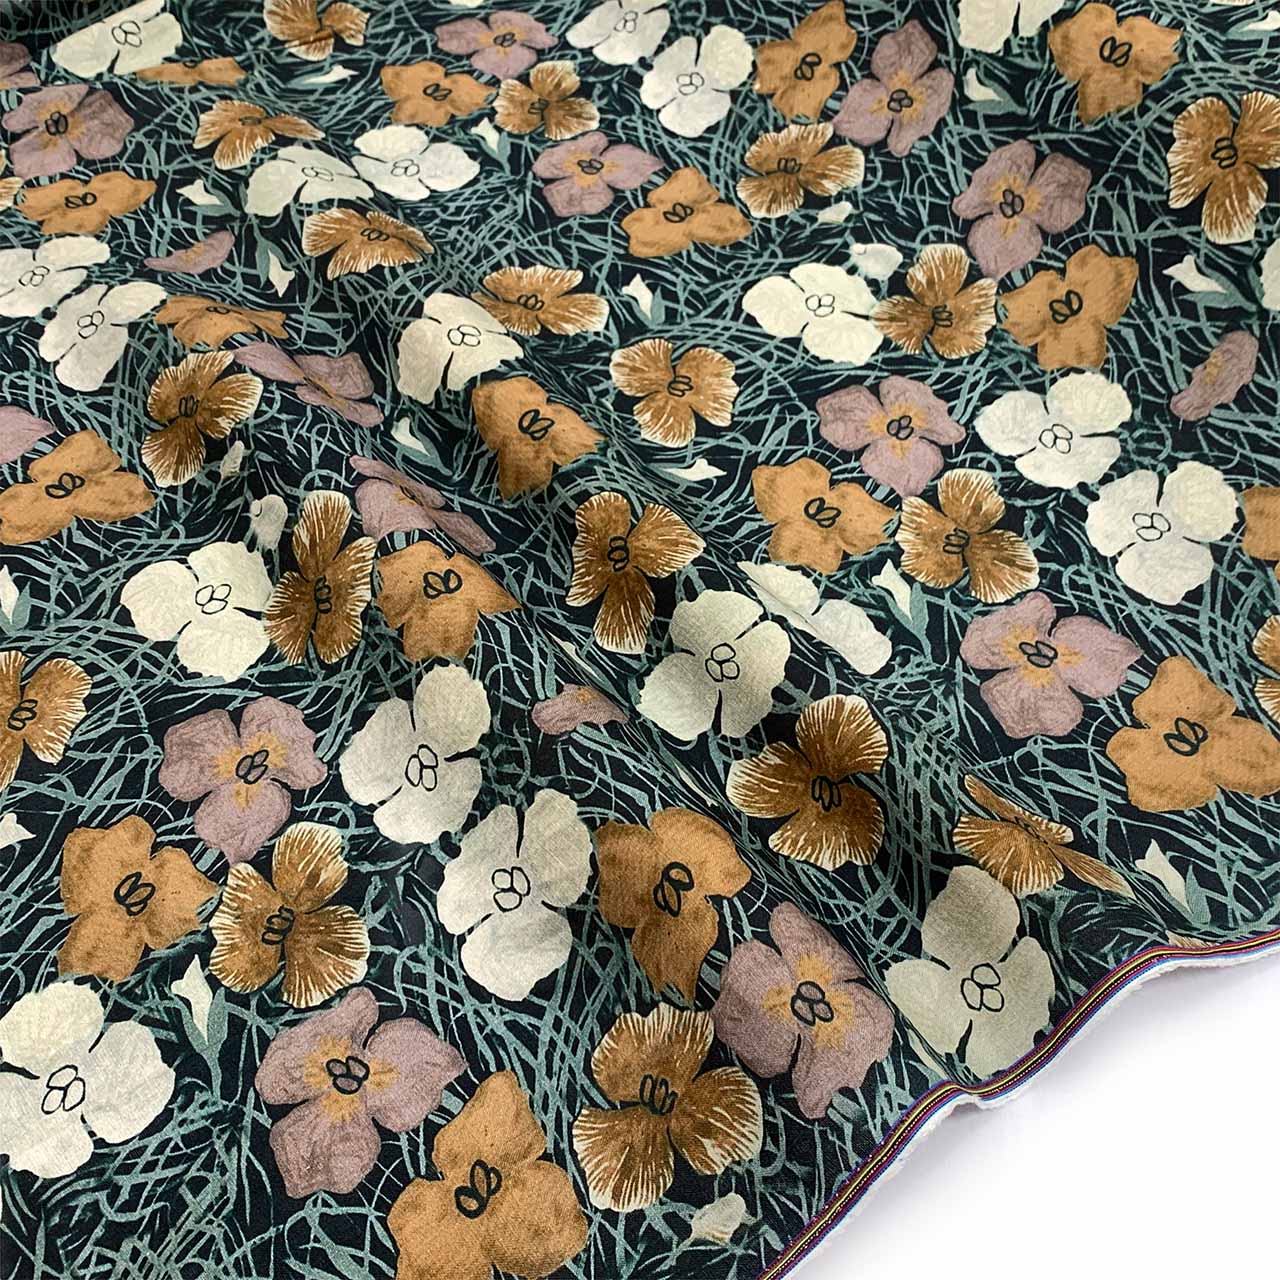 beige tan floral pattern printed on forest green natural fibre linen material